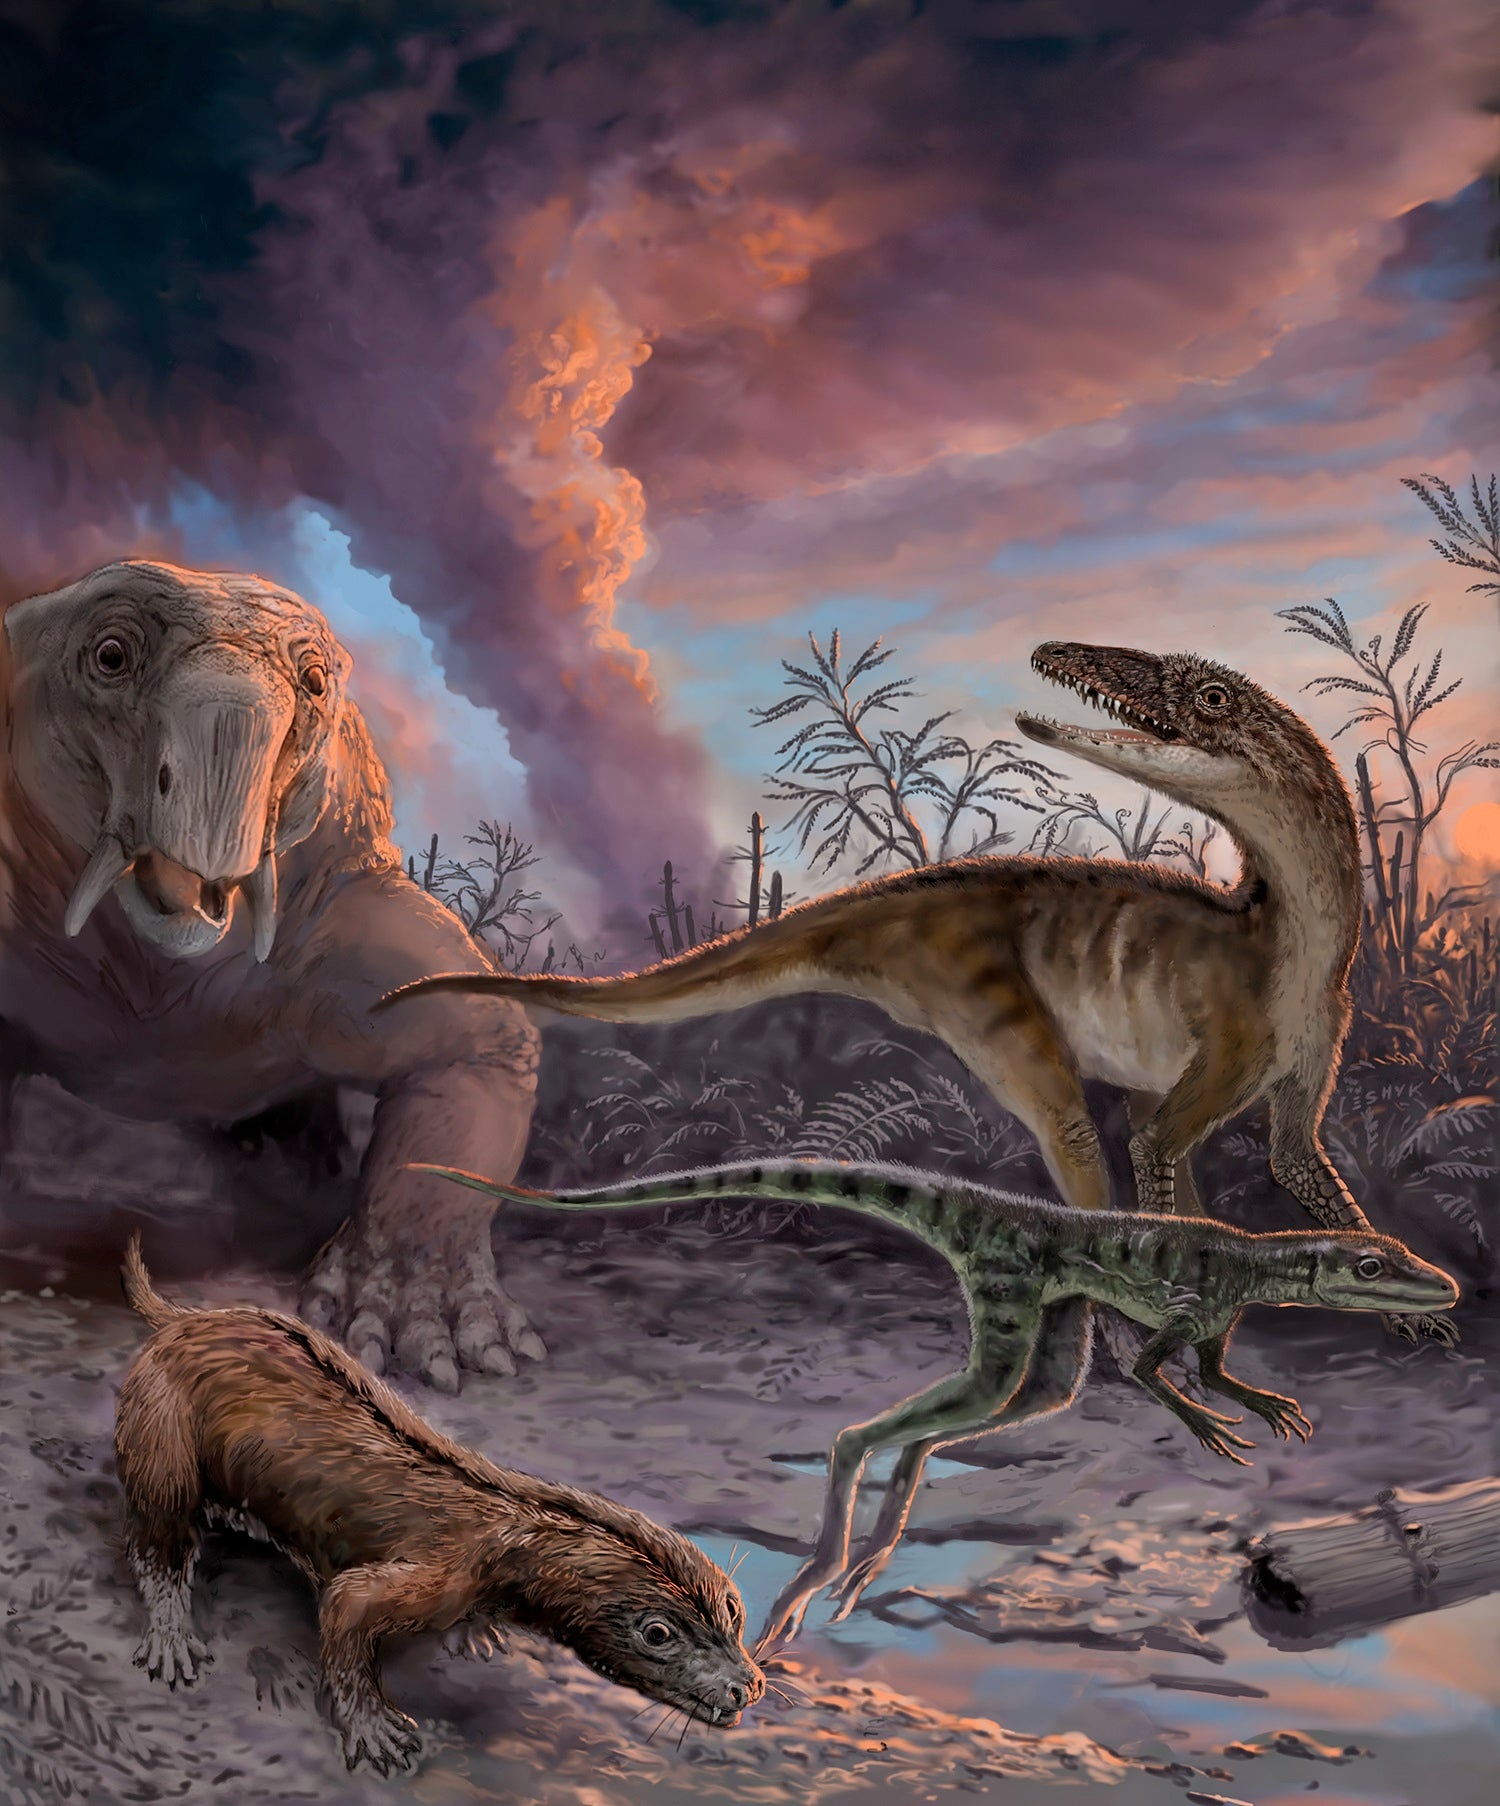 A warming planet may have set the stage for dinosaurs to rule the Earth